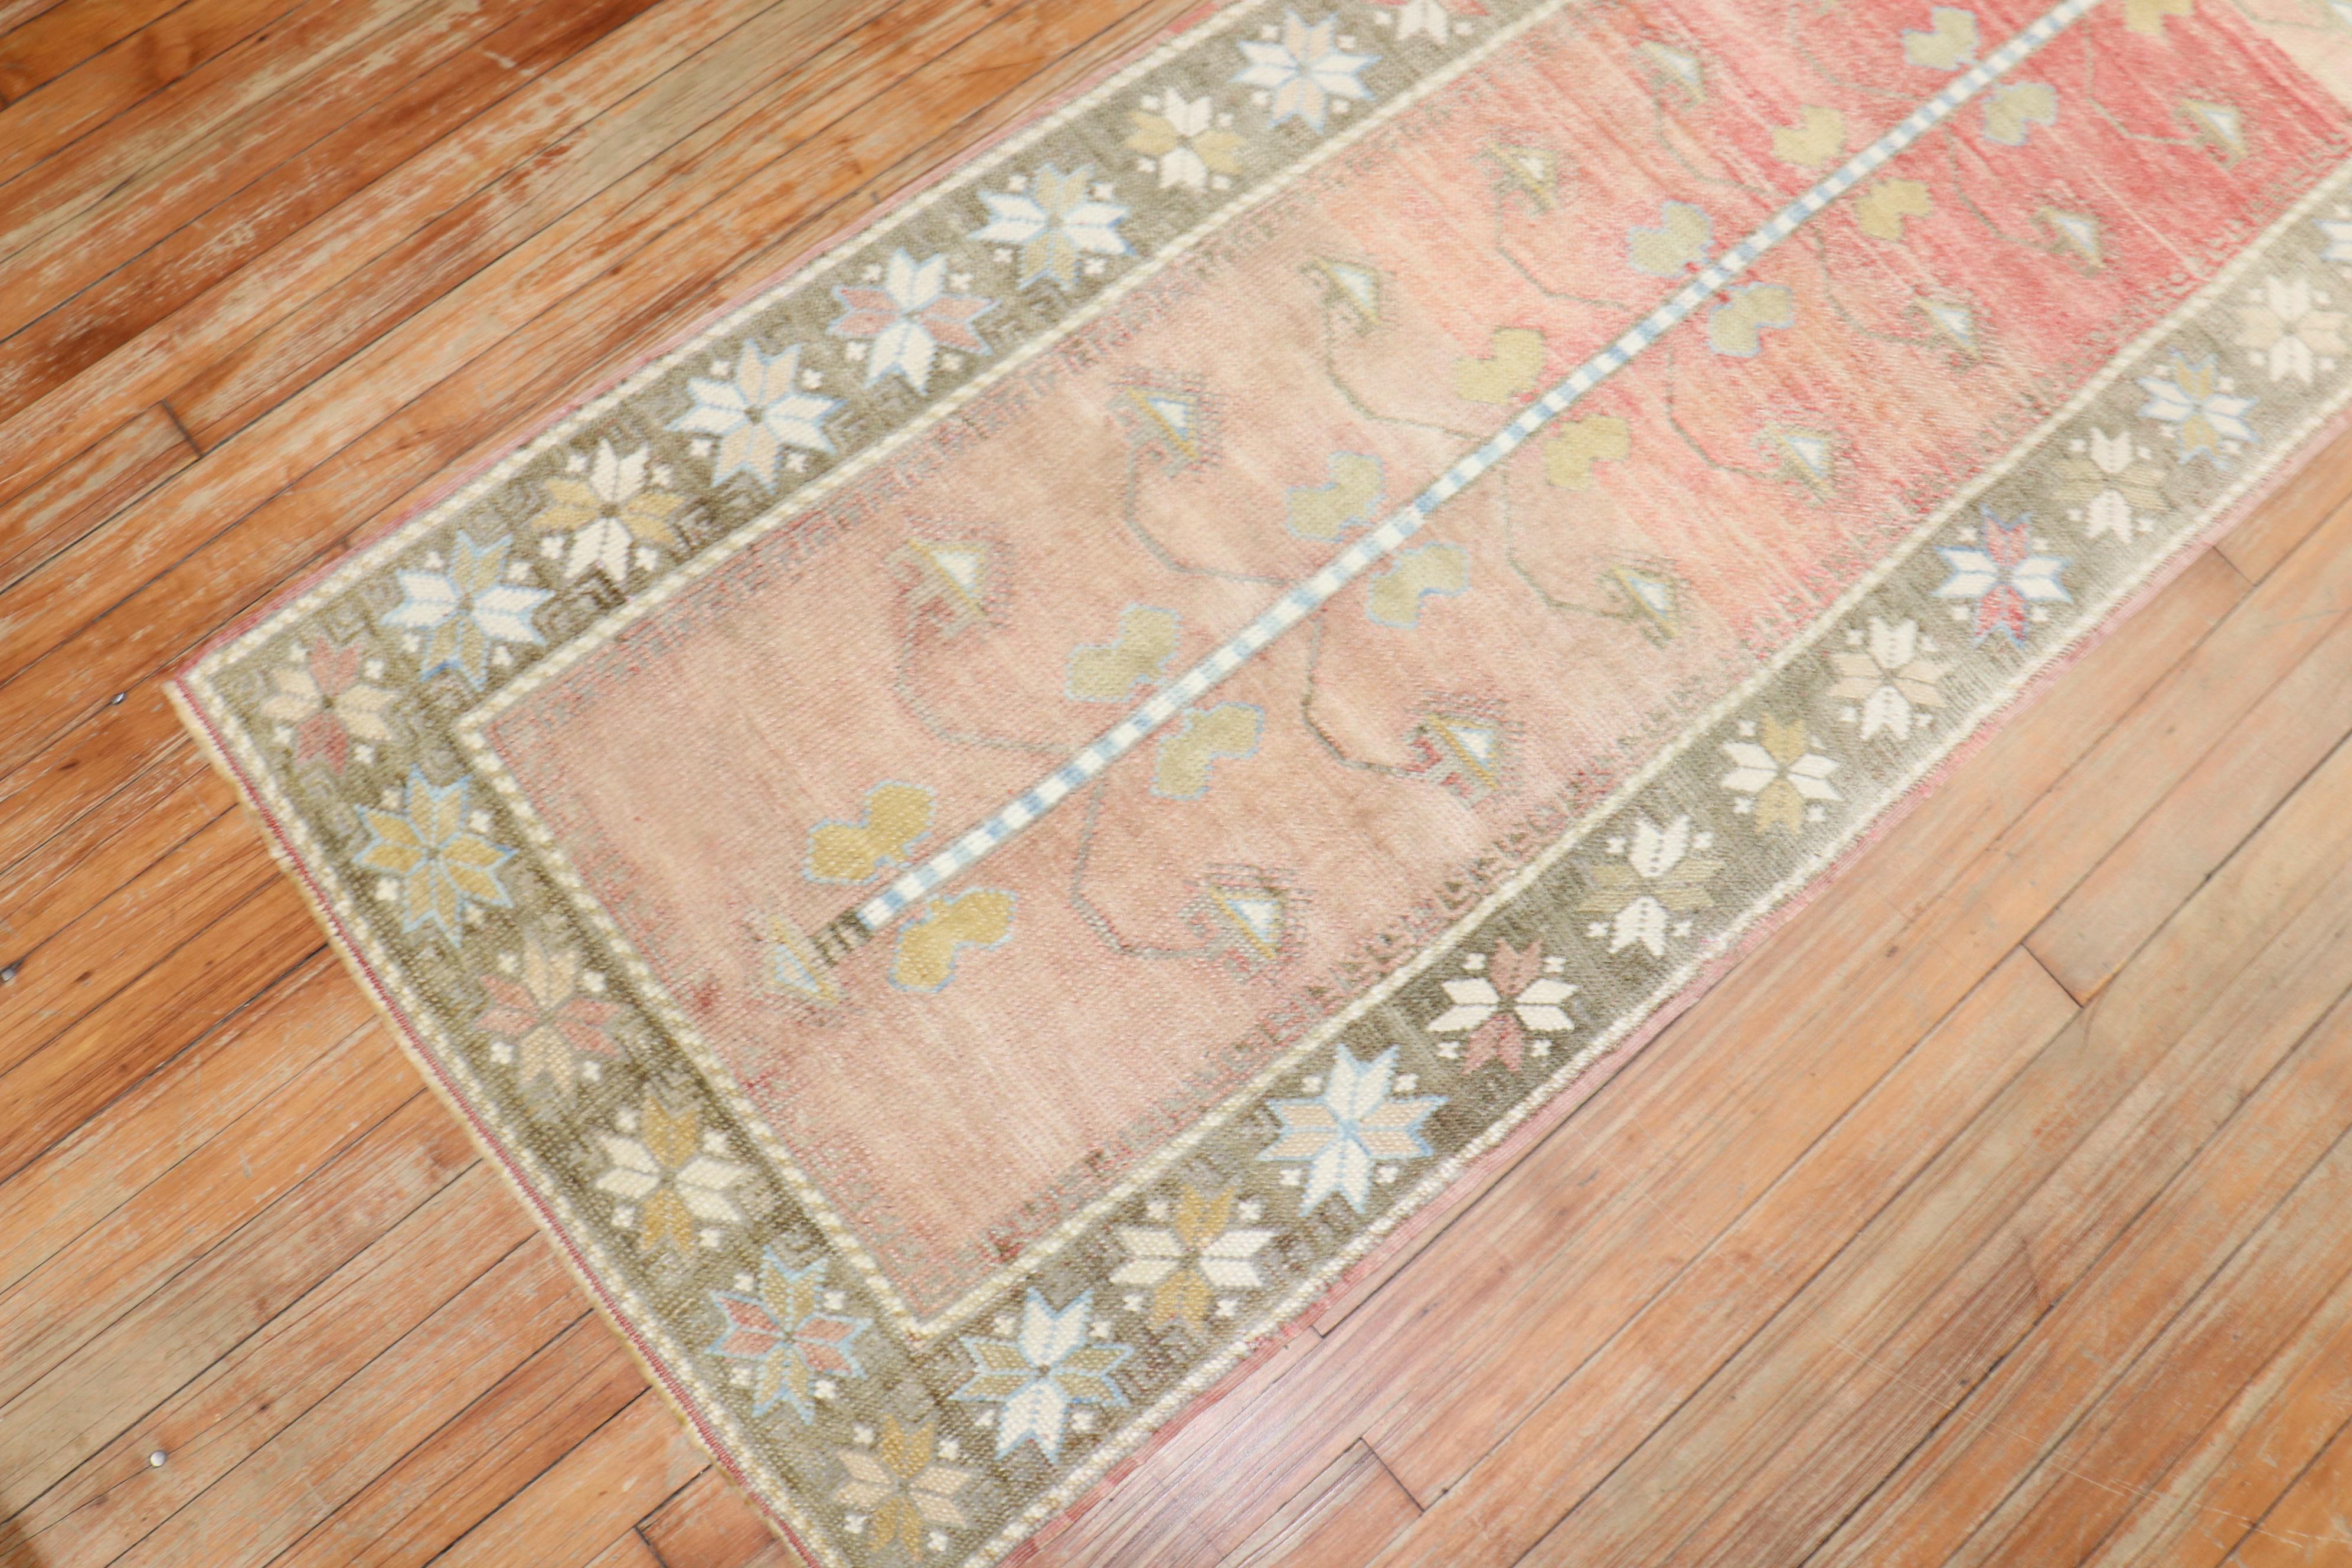 Mid 20th Century Turkish Anatolian Runner with an all-over floral design throughout

Measures: 2'7'' x 9'8''.